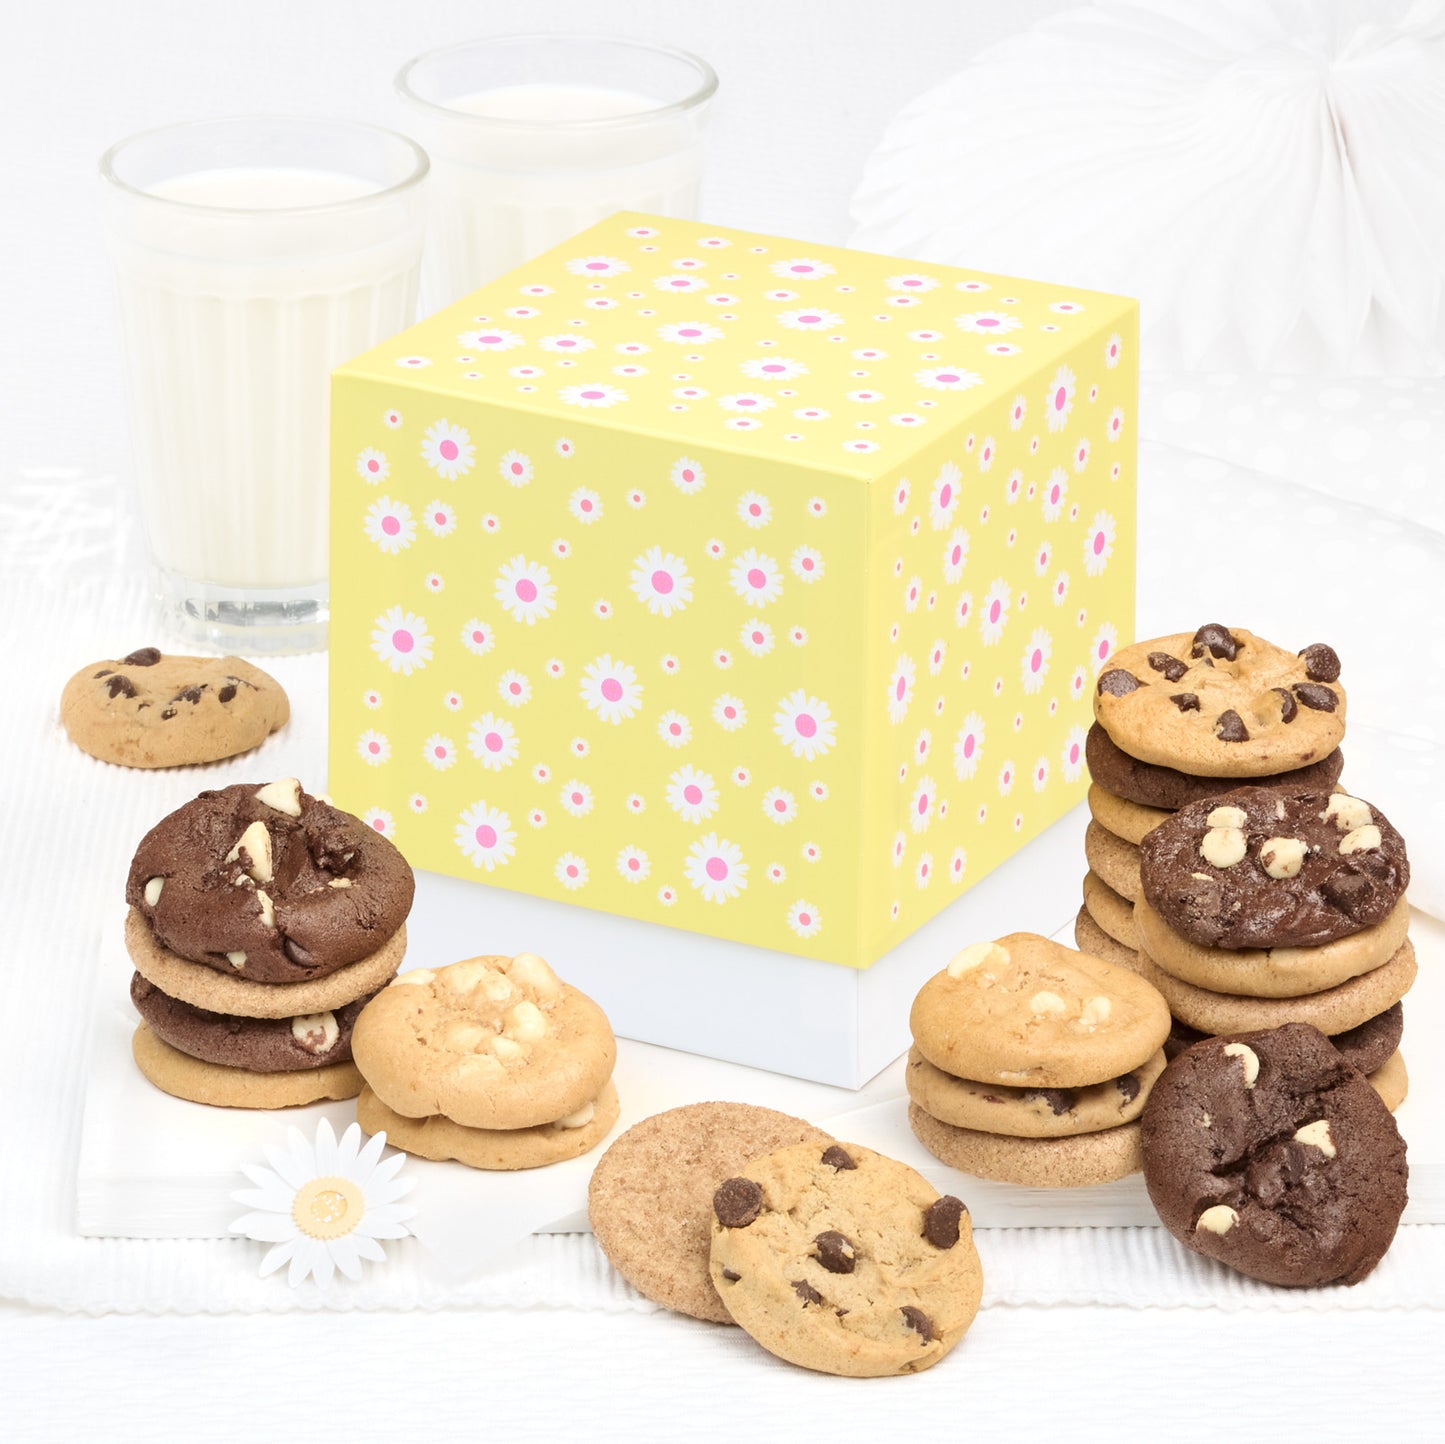 A yellow mini gift box decorated with white flowers surrounded by an assortment of nibblers